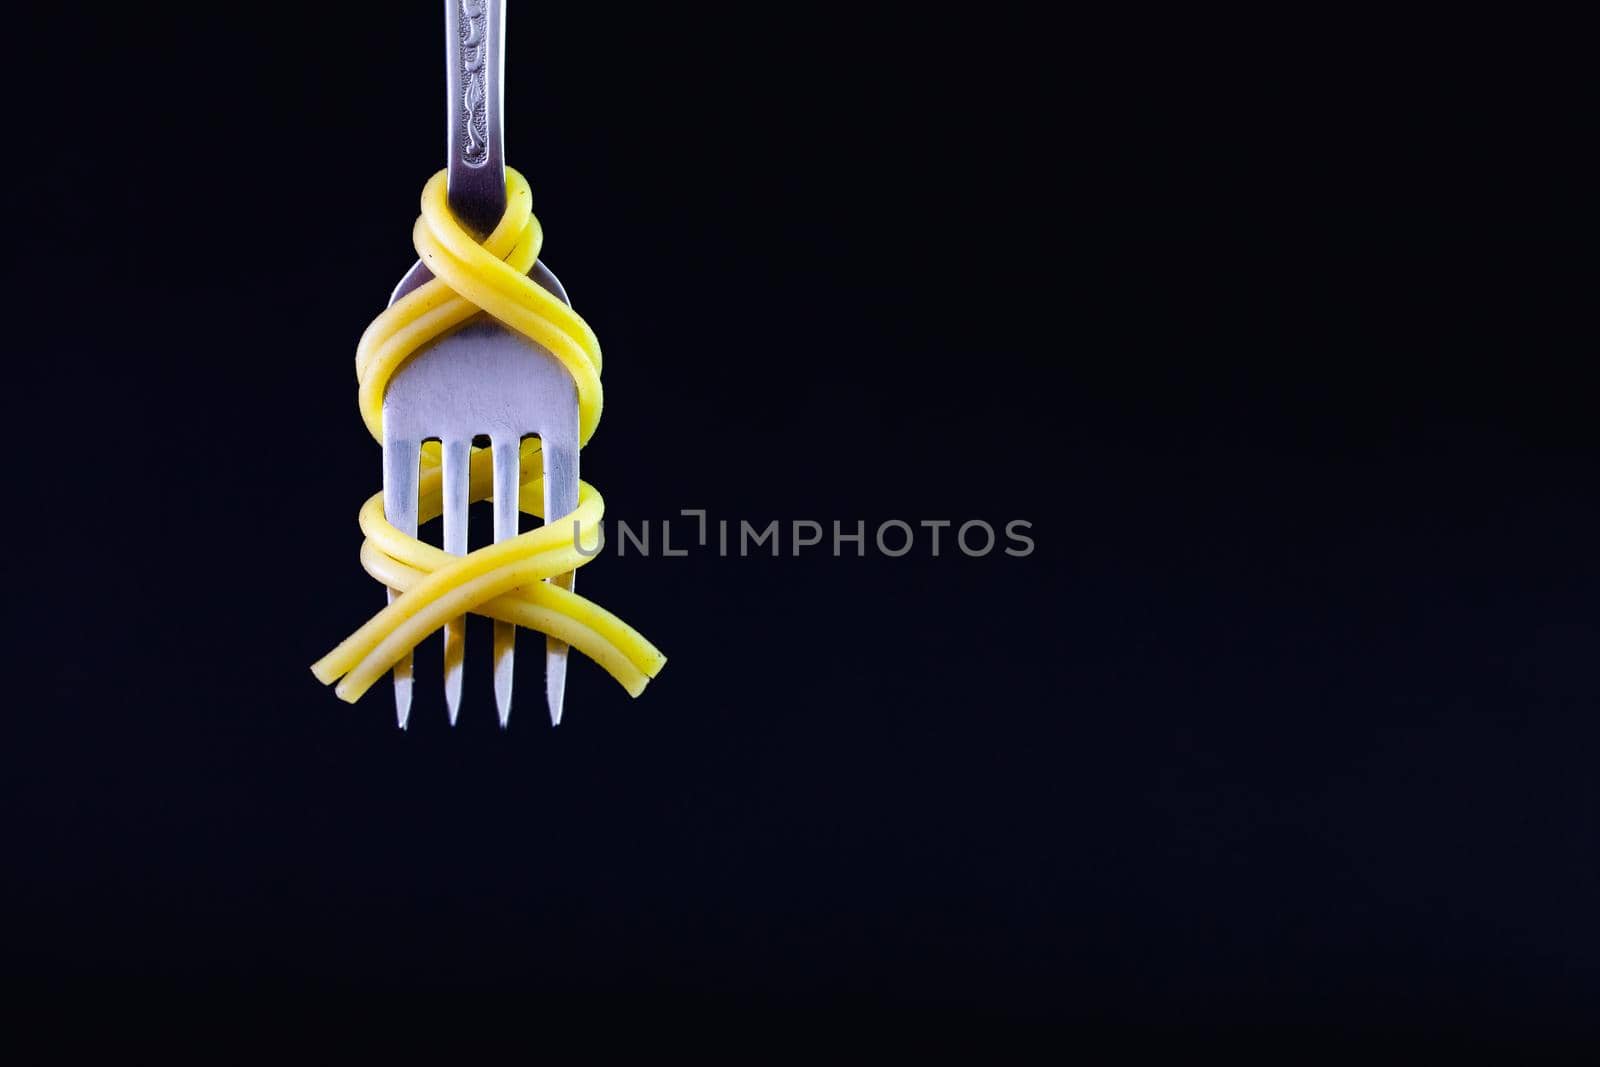 Freshly cooked pasta on a old fork on the black background. Symmetrical loop of spaghetti on an old fork.